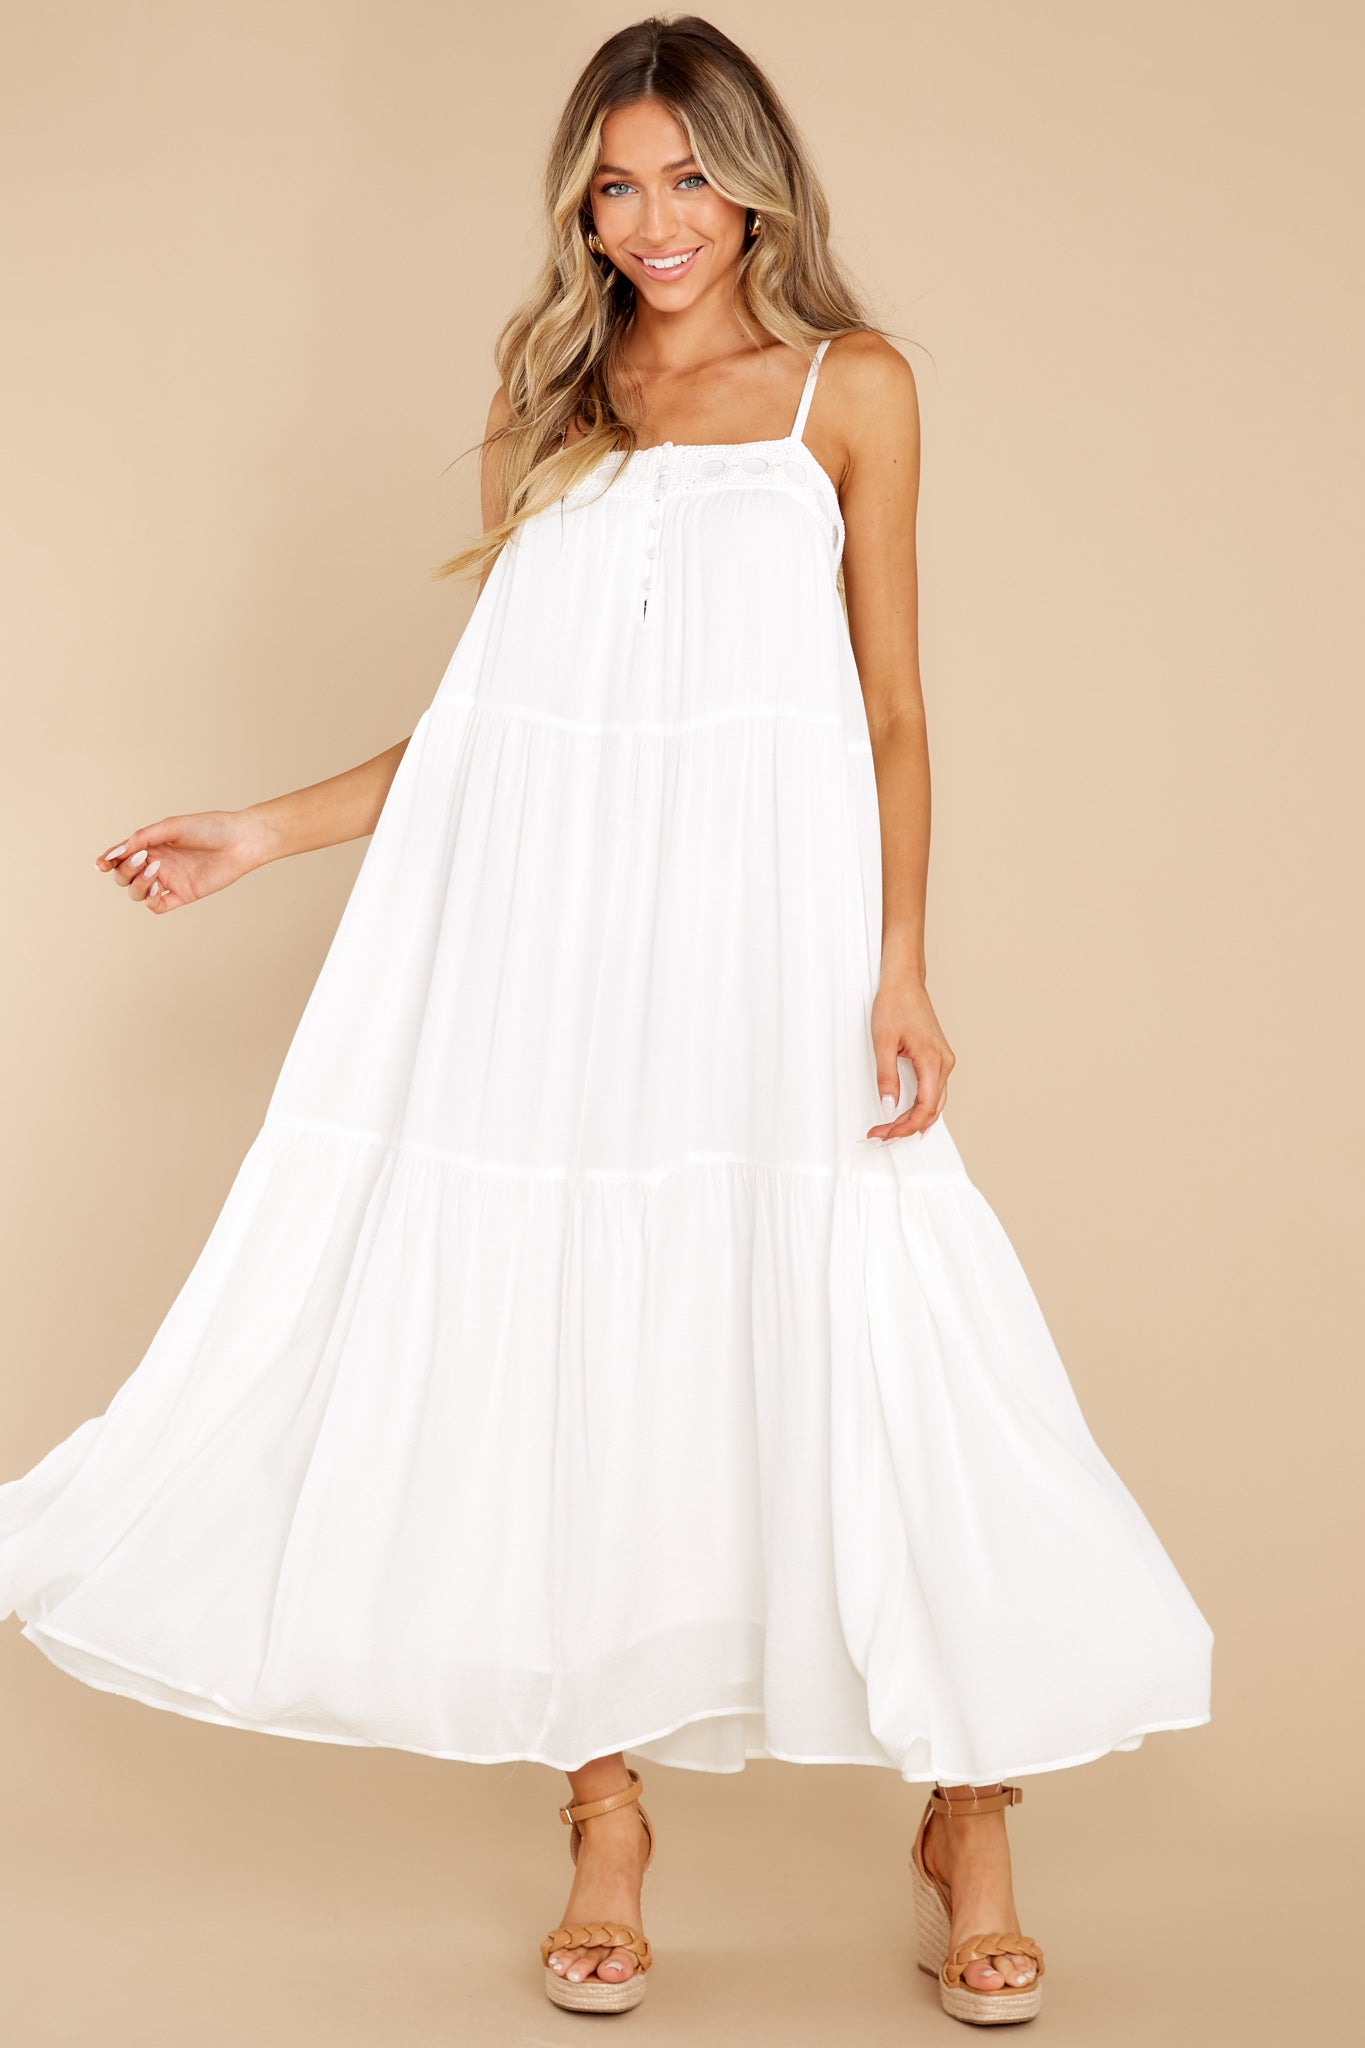 Top Tier White Maxi Dress - Red Dress